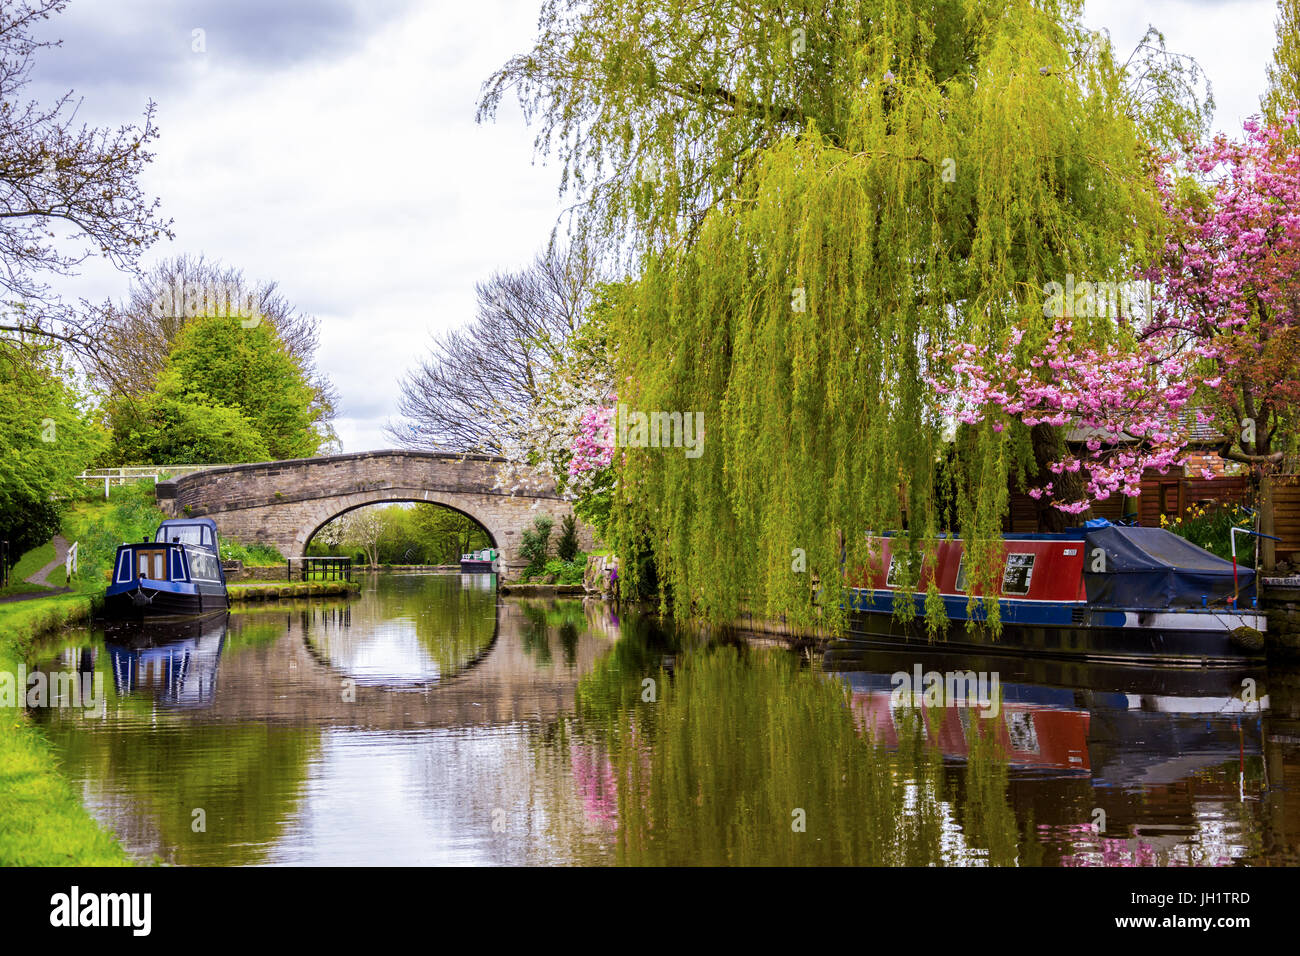 picturesque canal scene Stock Photo